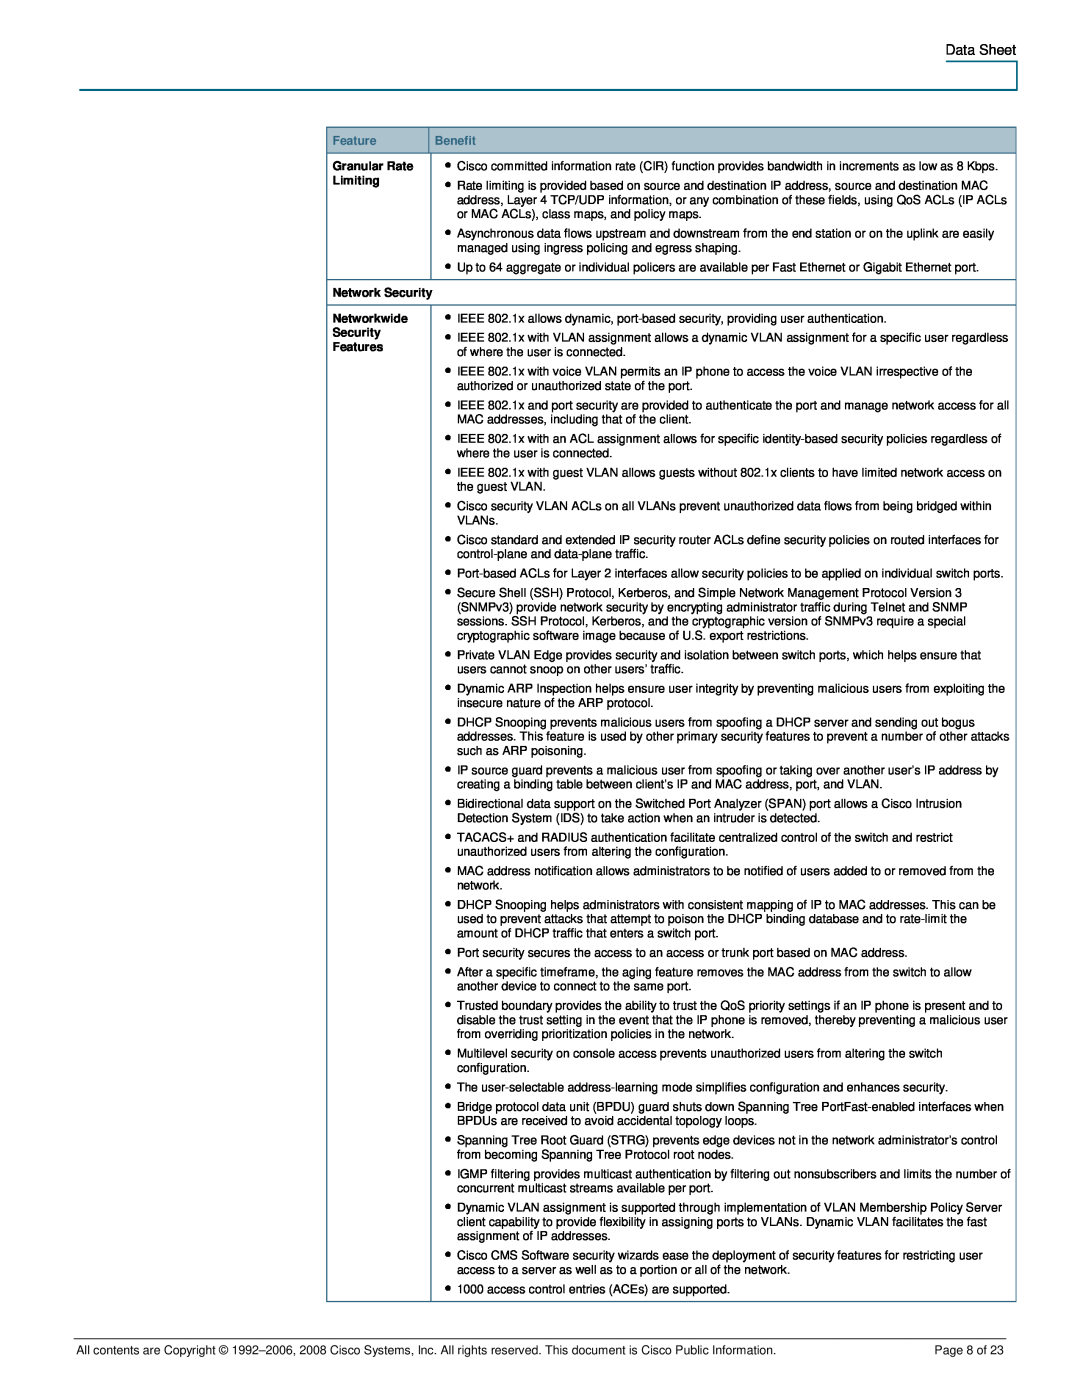 Cisco Systems 3750-24PS, 3750-48PS manual Feature, Benefit, Page 8 of 